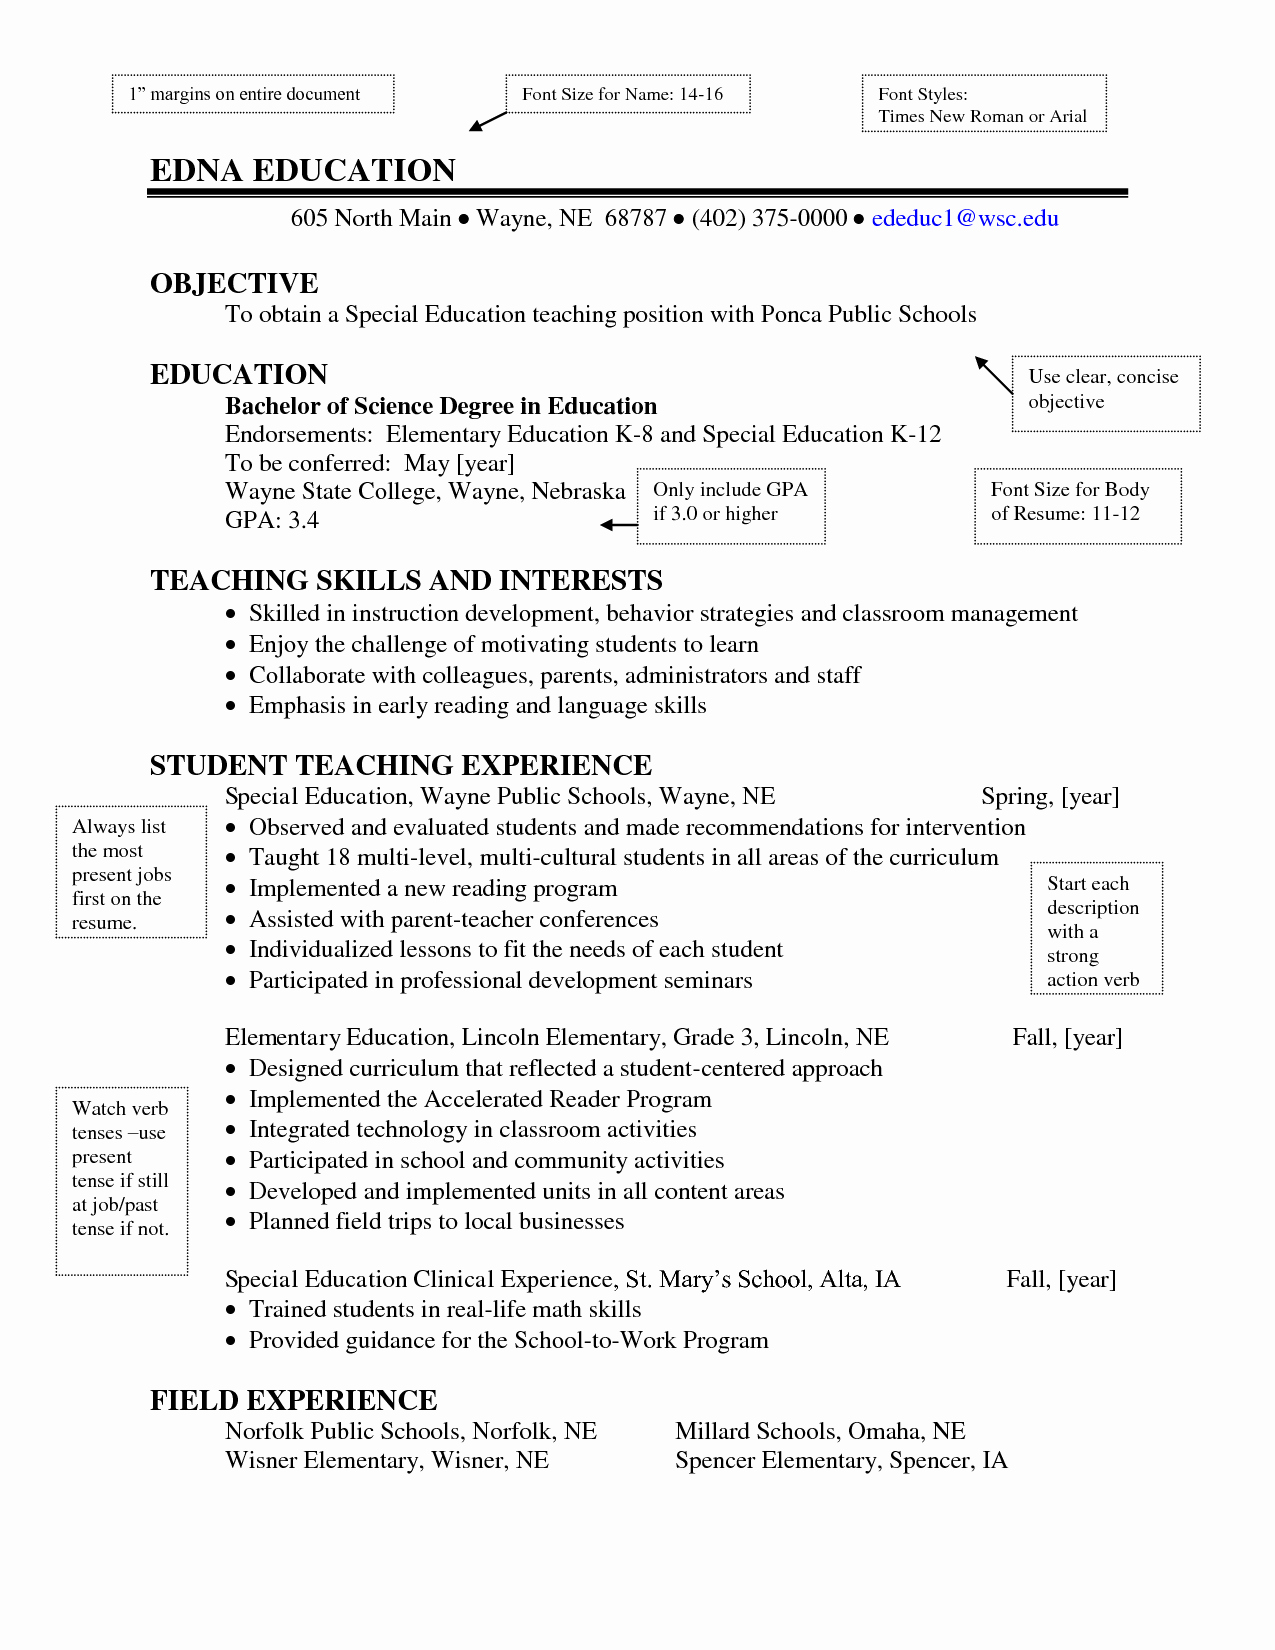 Sample Objective Resume Sample Special Education Teaching